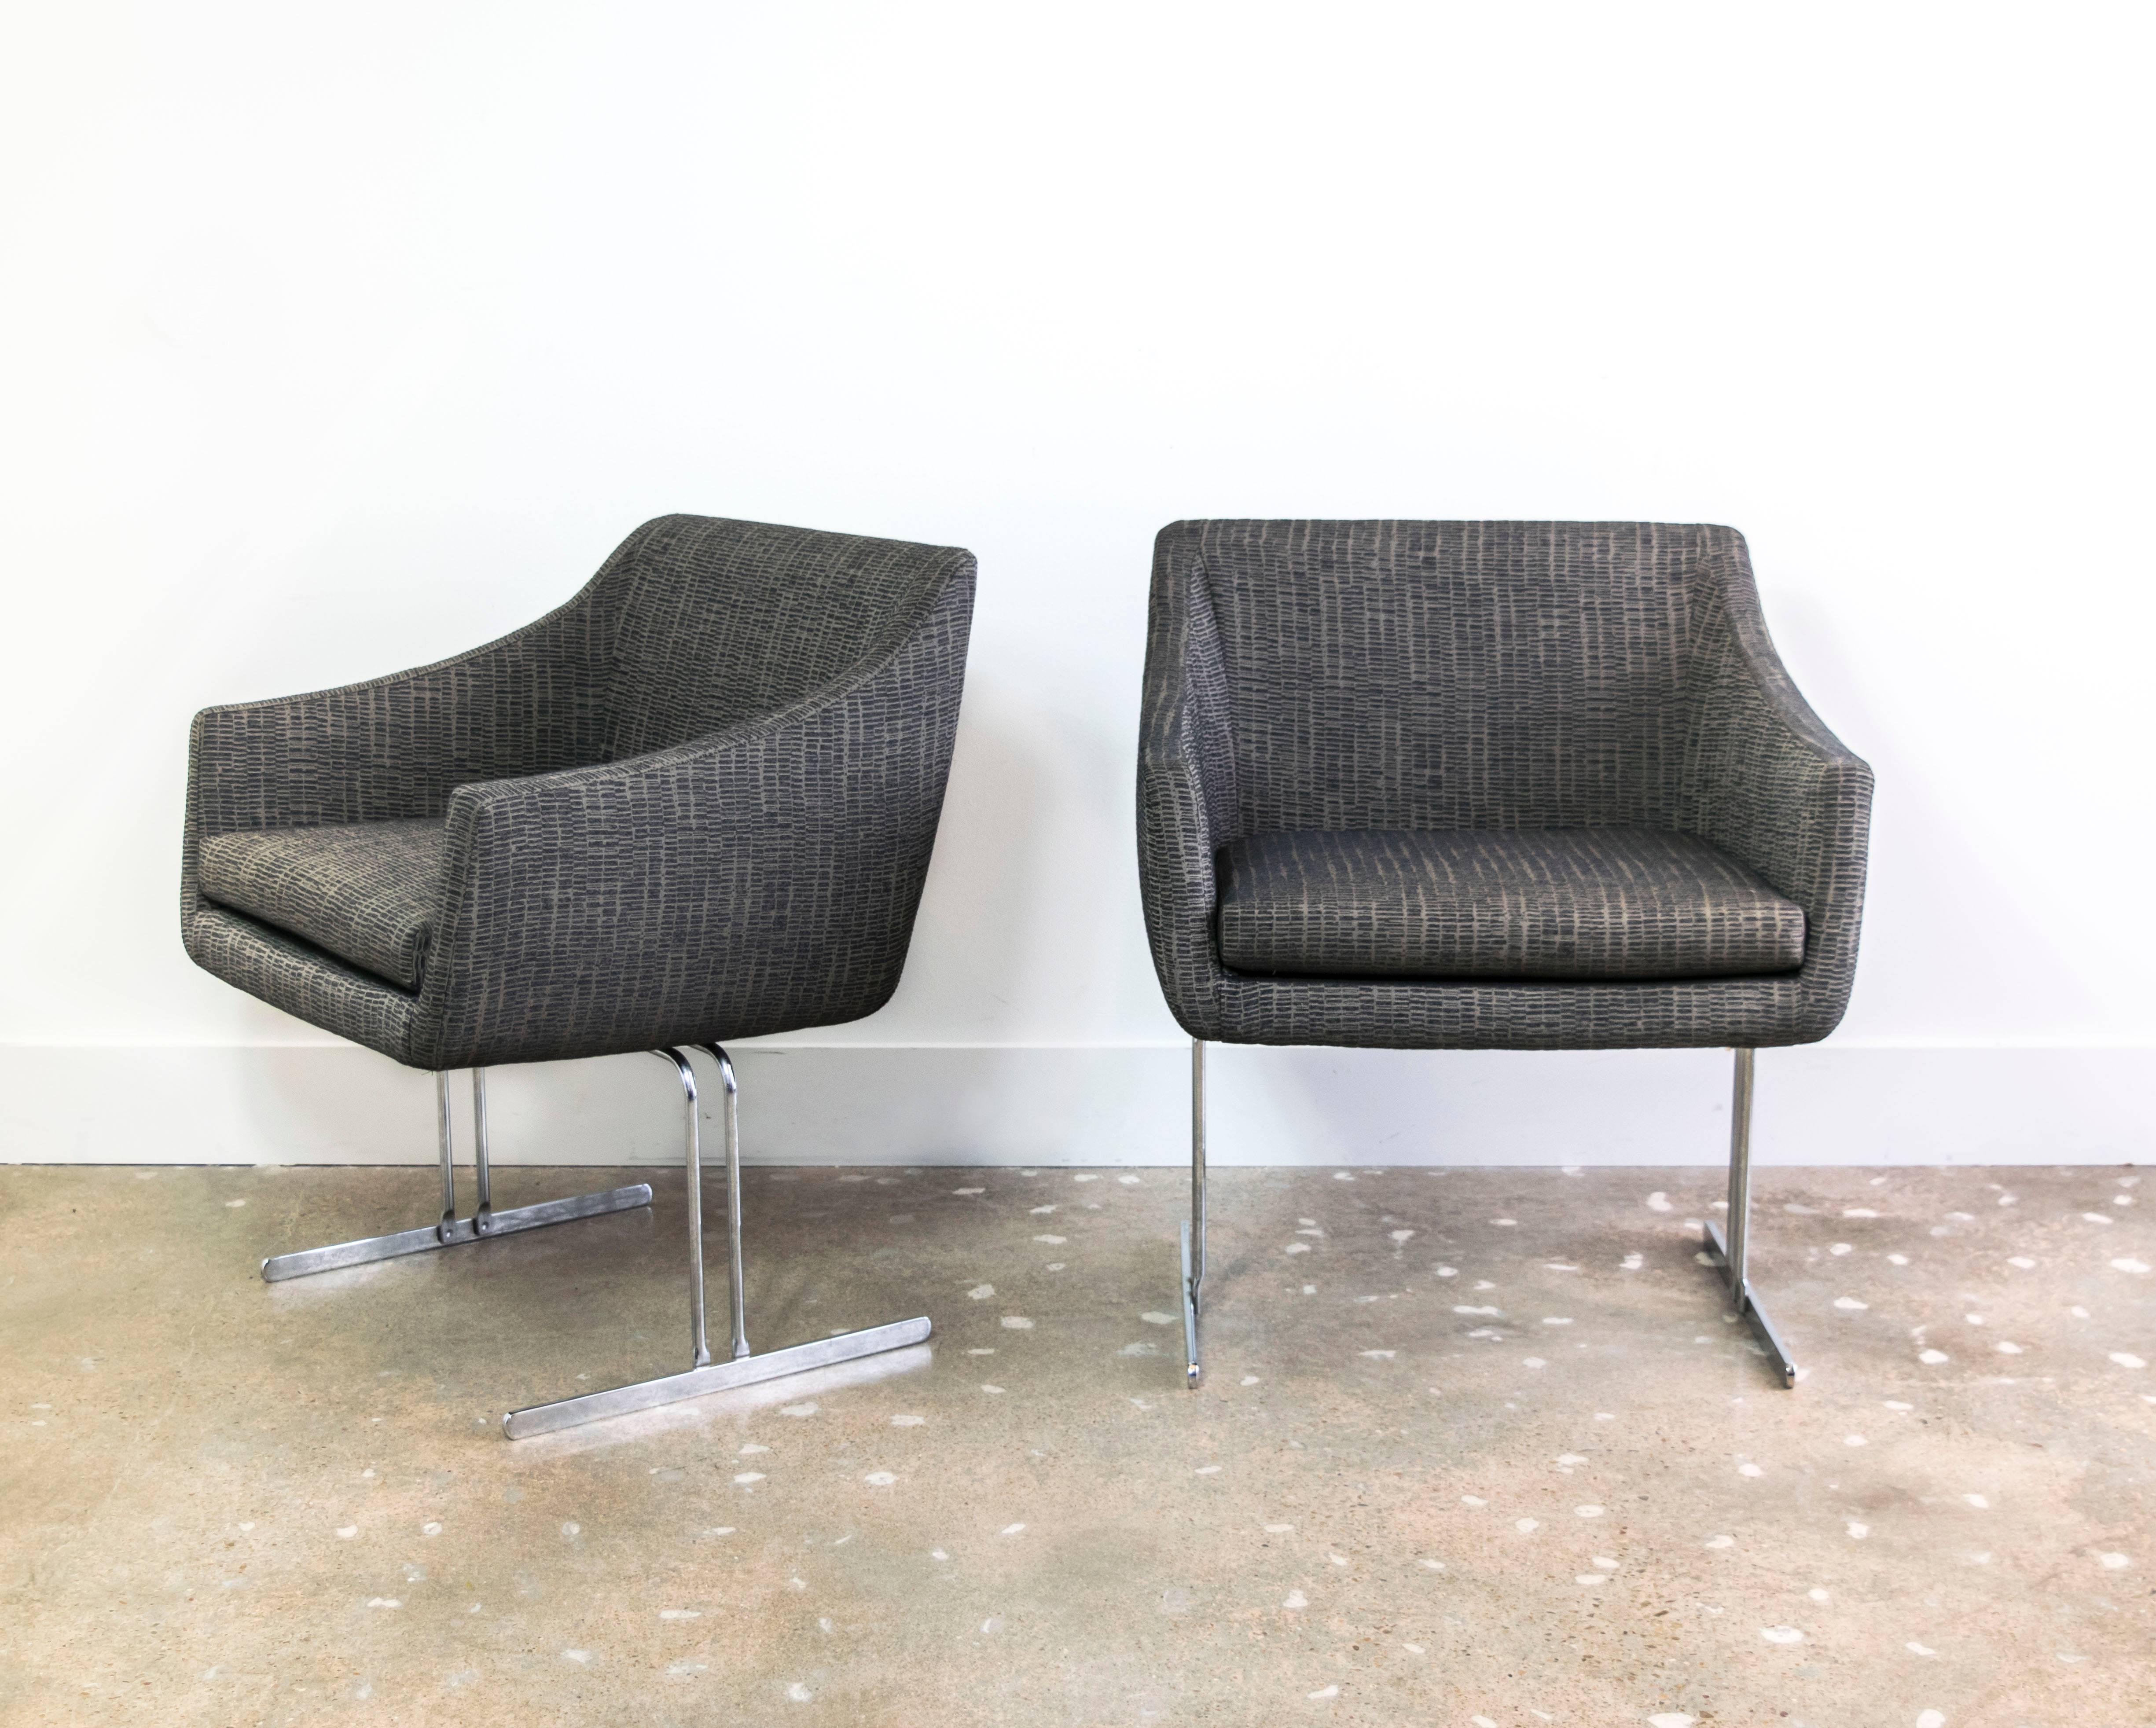 Sleek, minimal Mid Century lounge chairs by Hugh Acton for Vecta recently reupholstered in stunning Knoll Trophy Truffle modern upholstery.